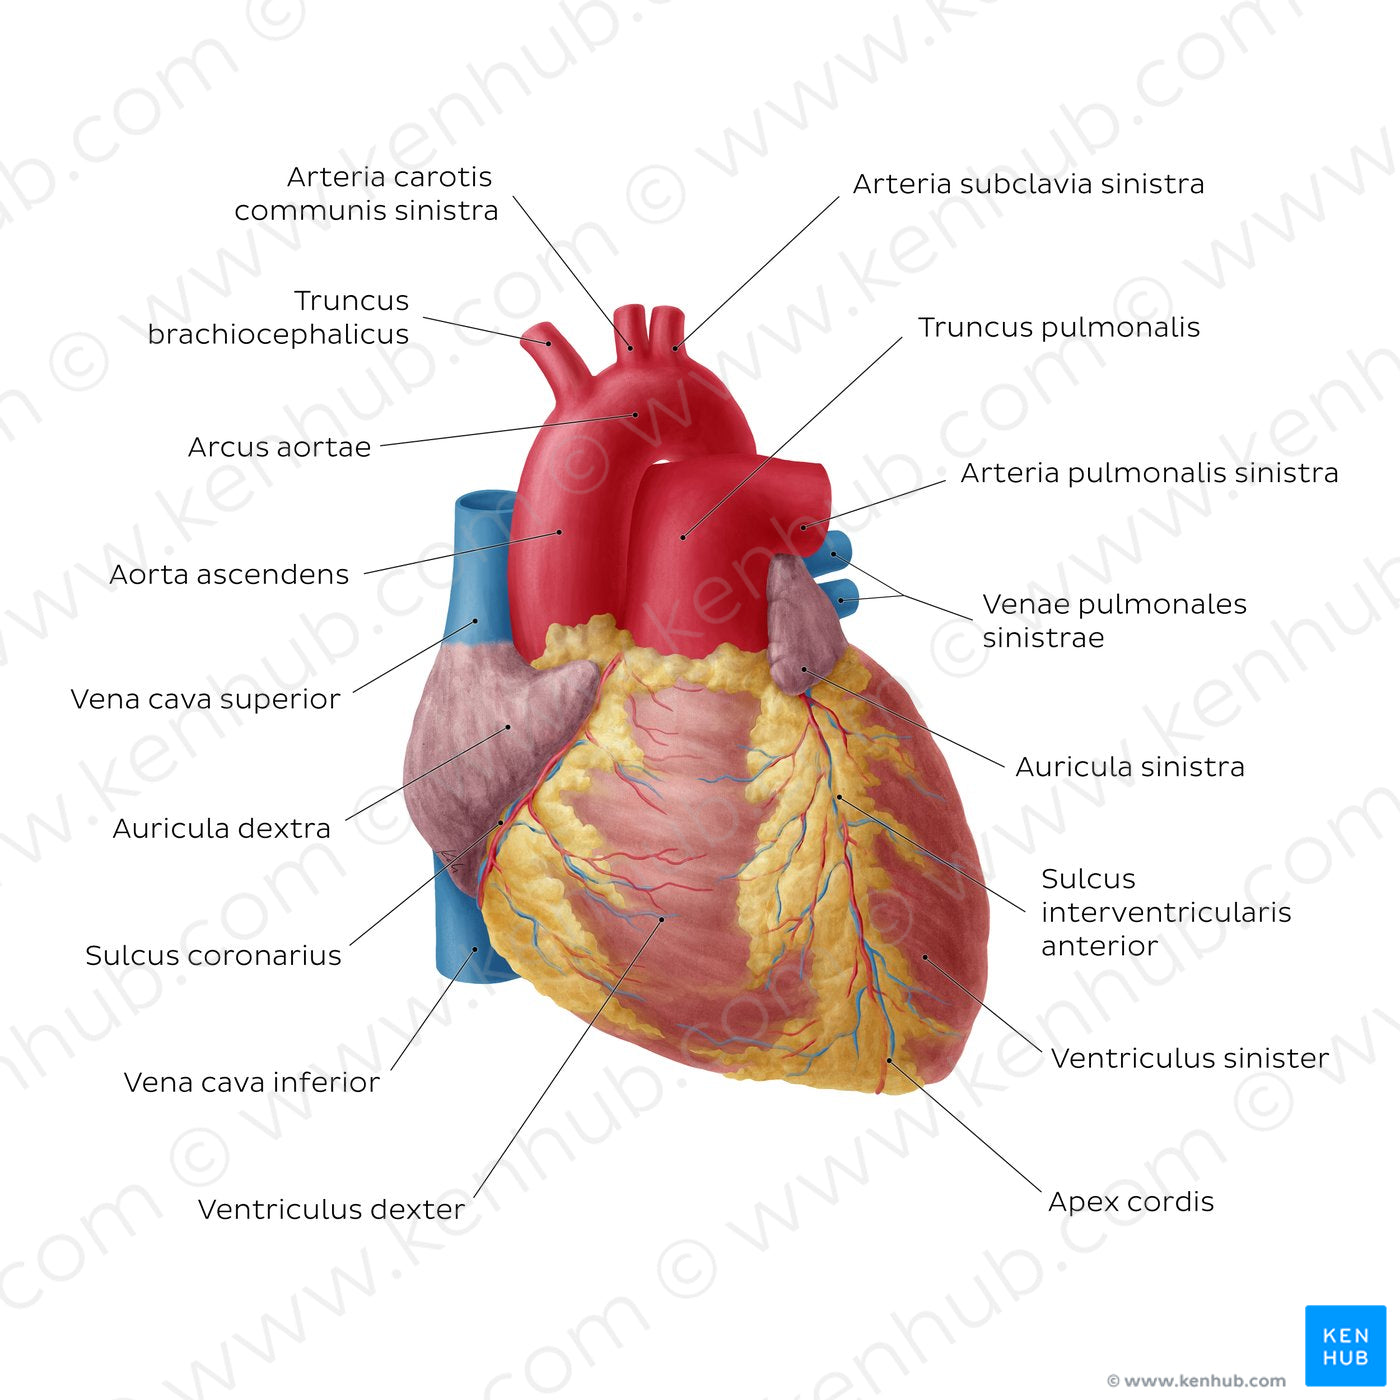 Anterior view of the heart (Latin)